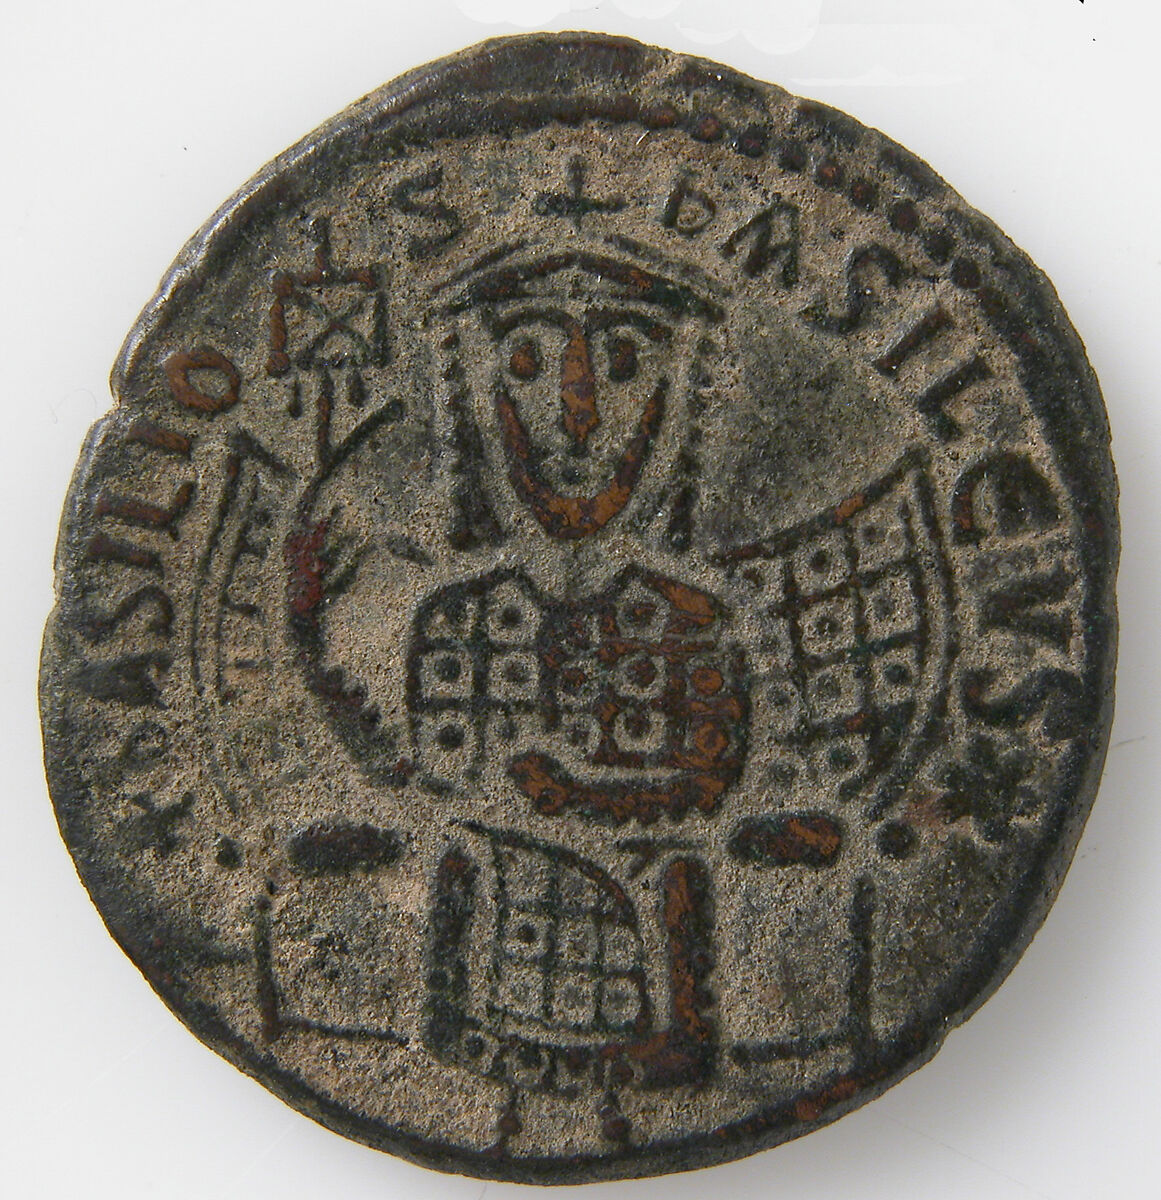 Coin of Basil I, Copper alloy (catalogue card says bronze), Byzantine 